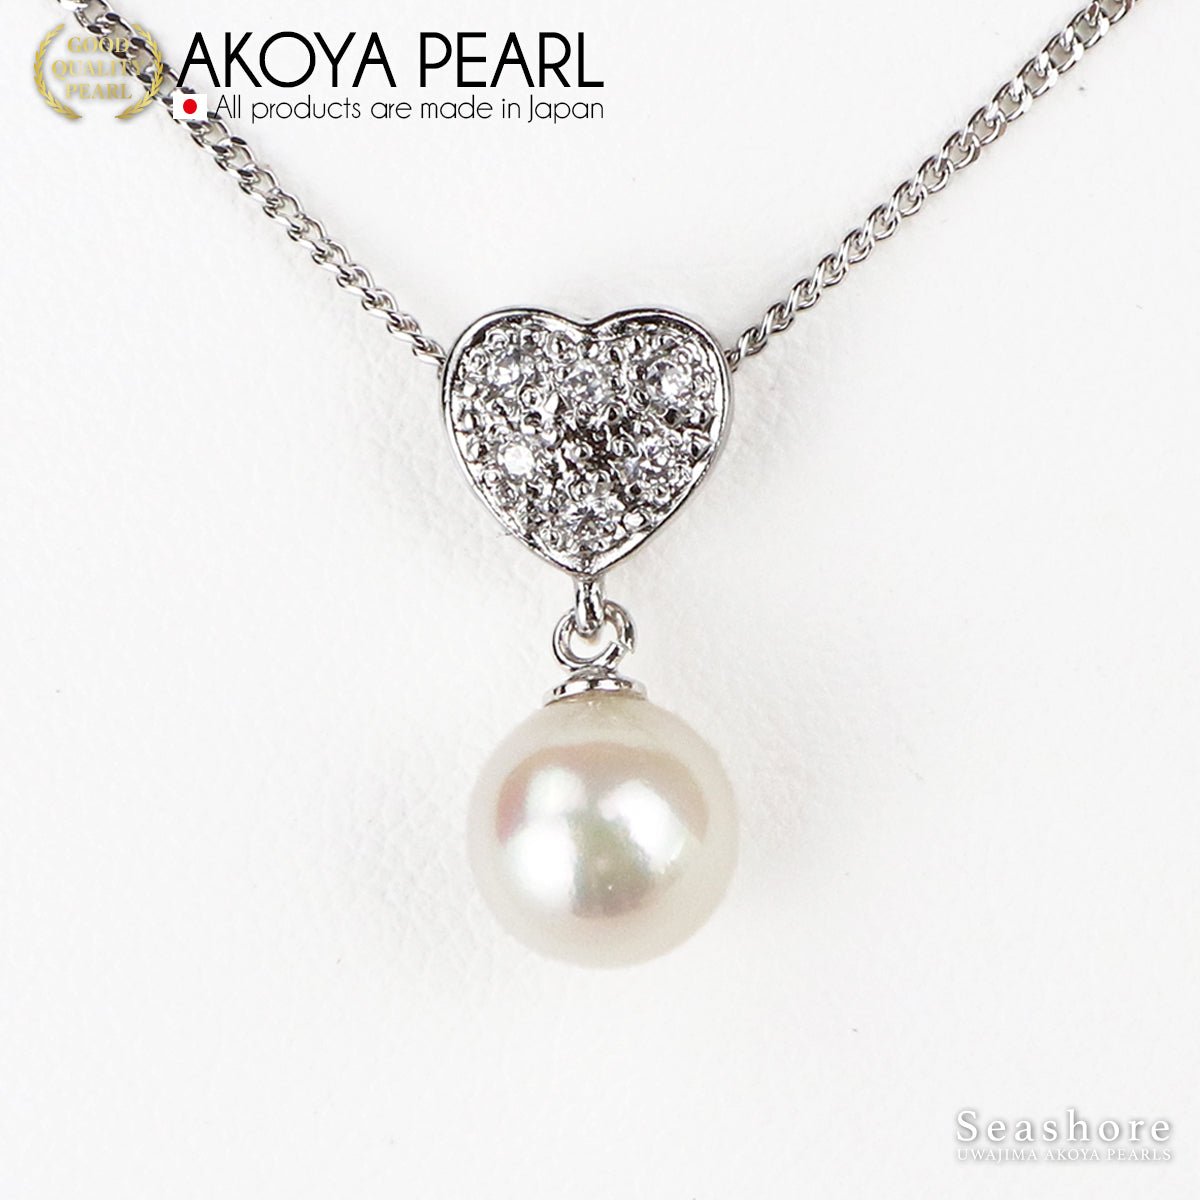 Akoya Pearl Pave Heart Necklace White [7.5-8.0mm] SV925 Platinum Finish Pearl Pendant (4036)